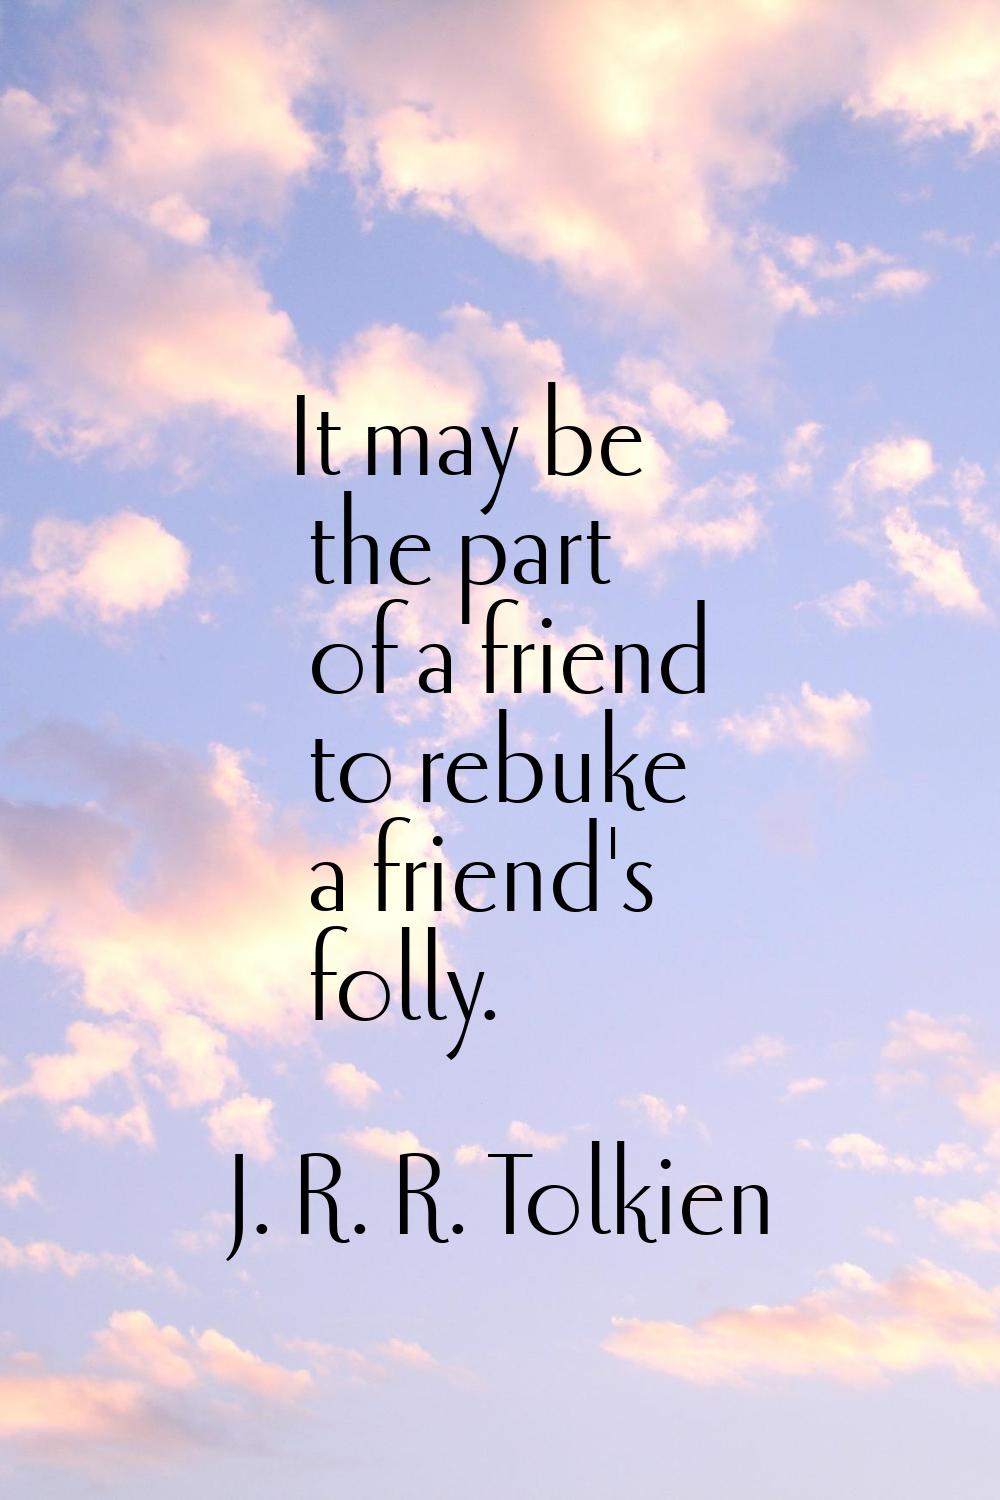 It may be the part of a friend to rebuke a friend's folly.